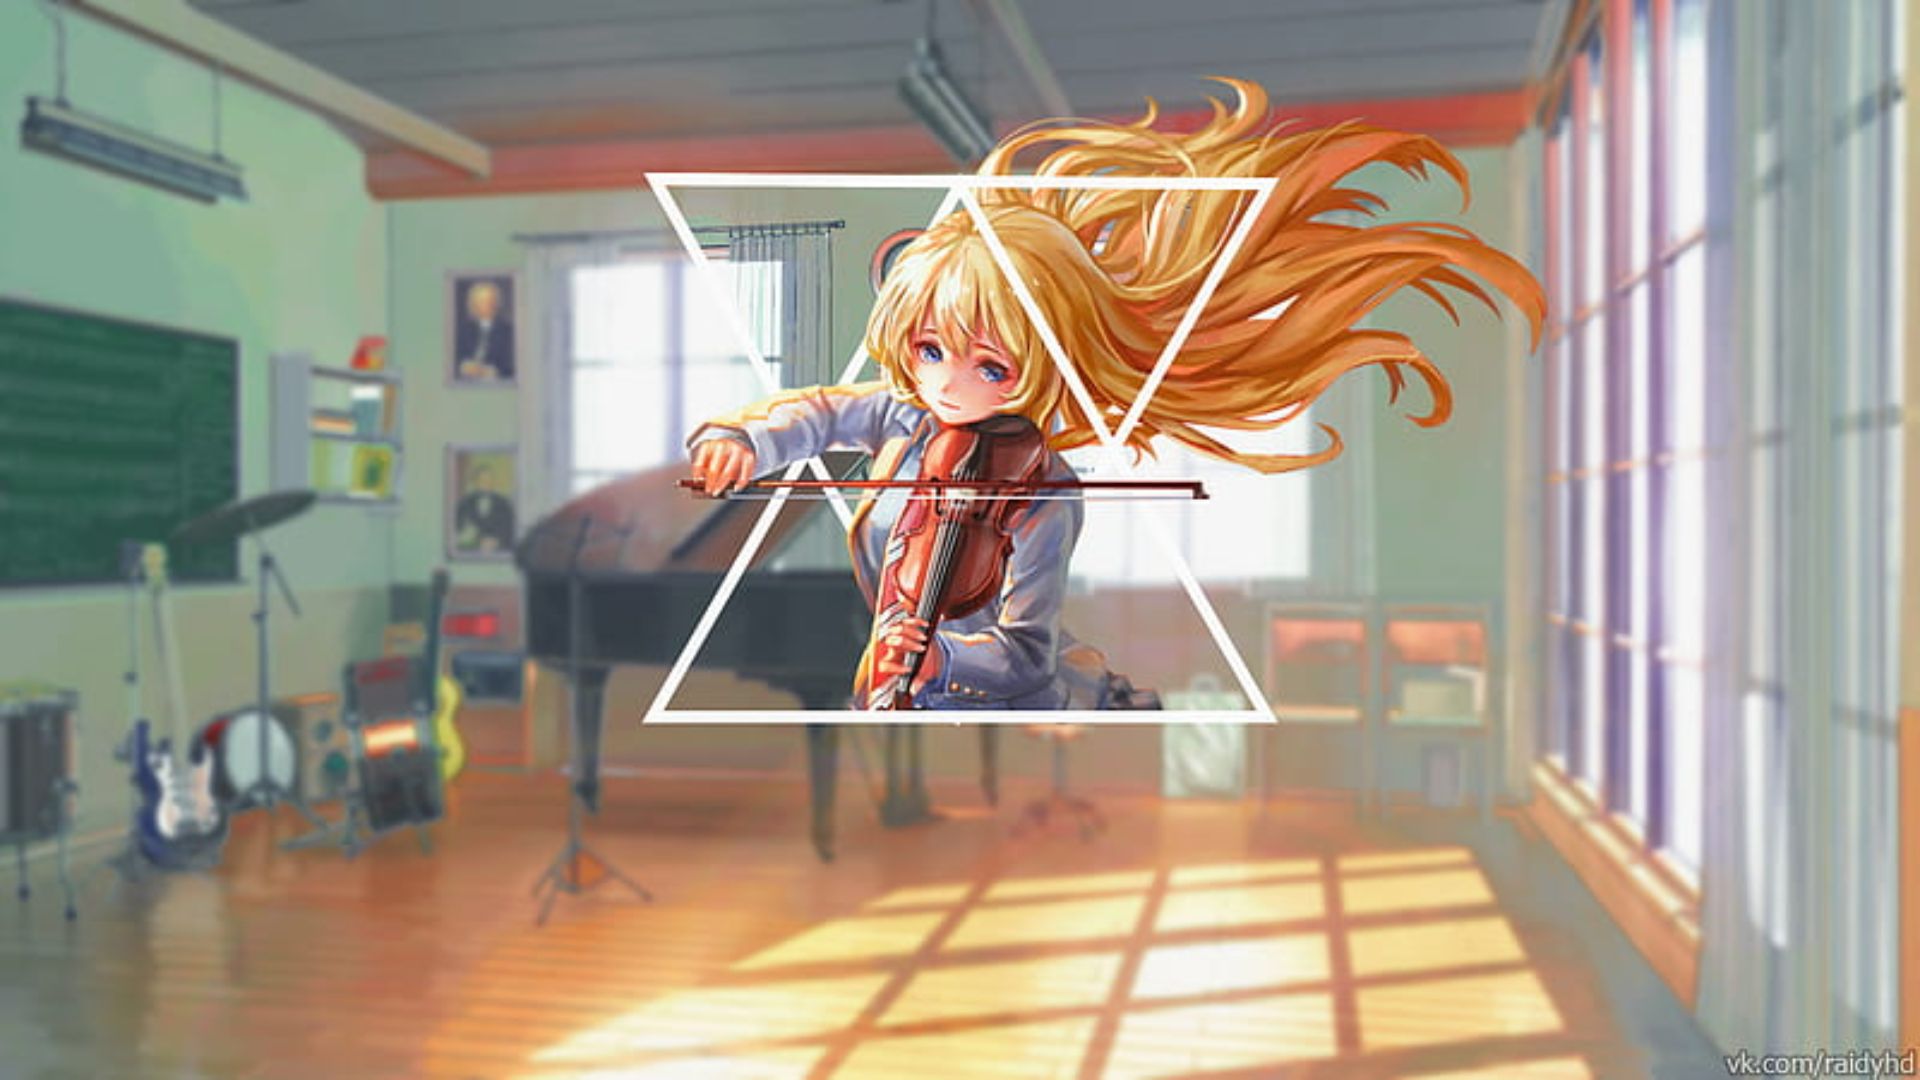 Your Lie in April Backgrounds PC